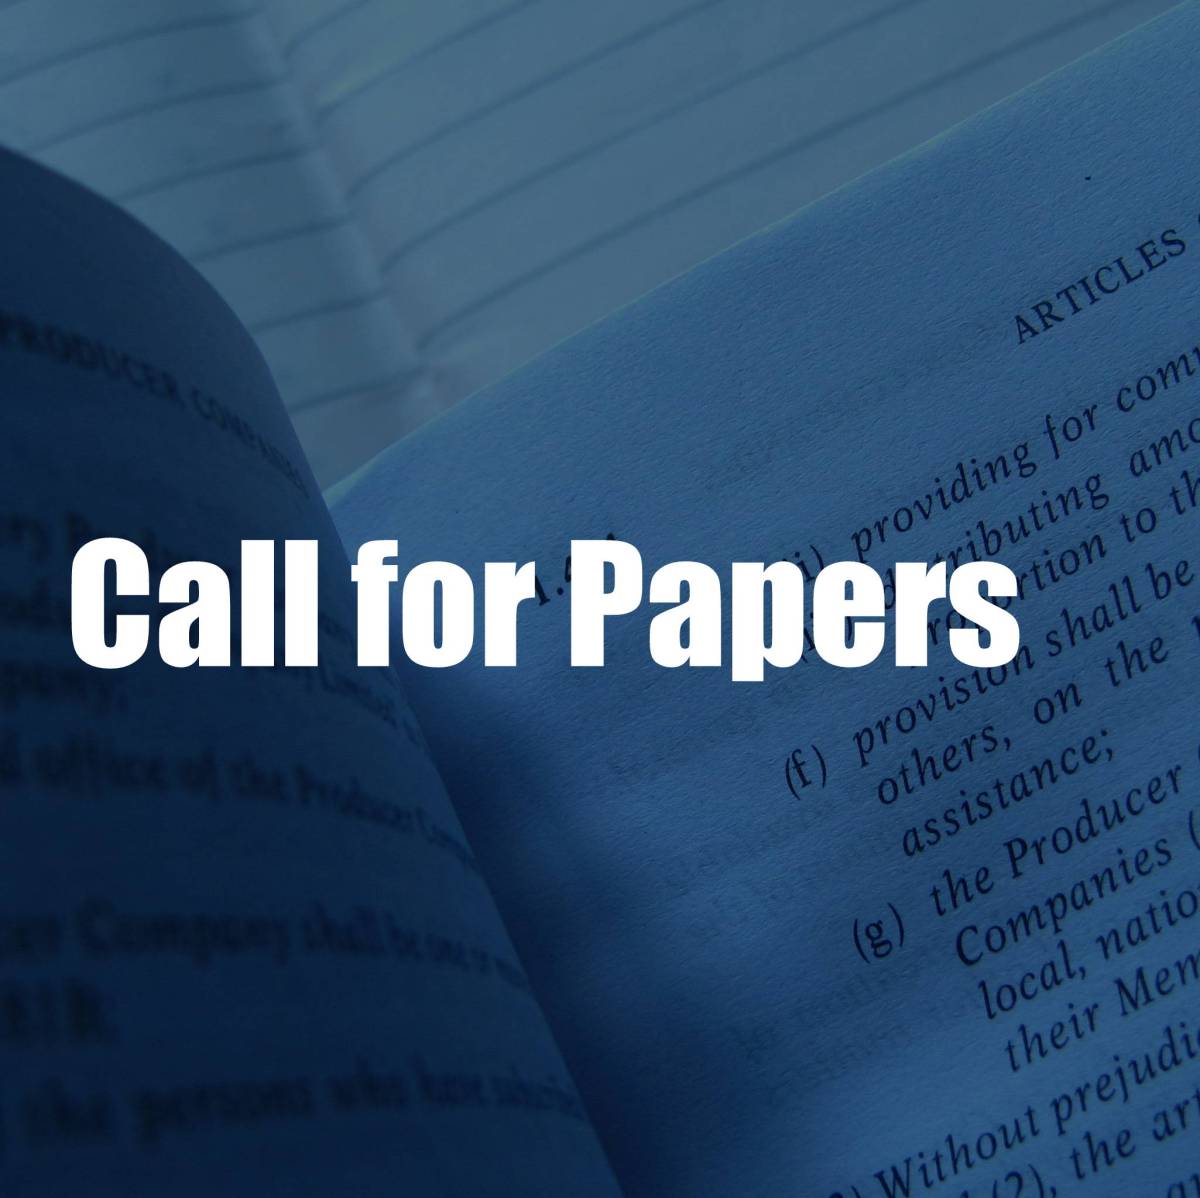 CALL FOR PAPERS : TWO DAY NATIONAL SEMINAR ON“CHALLENGES AND OPPORTUNITIES FOR WOMEN IN THE DYNAMIC SOCIETY”